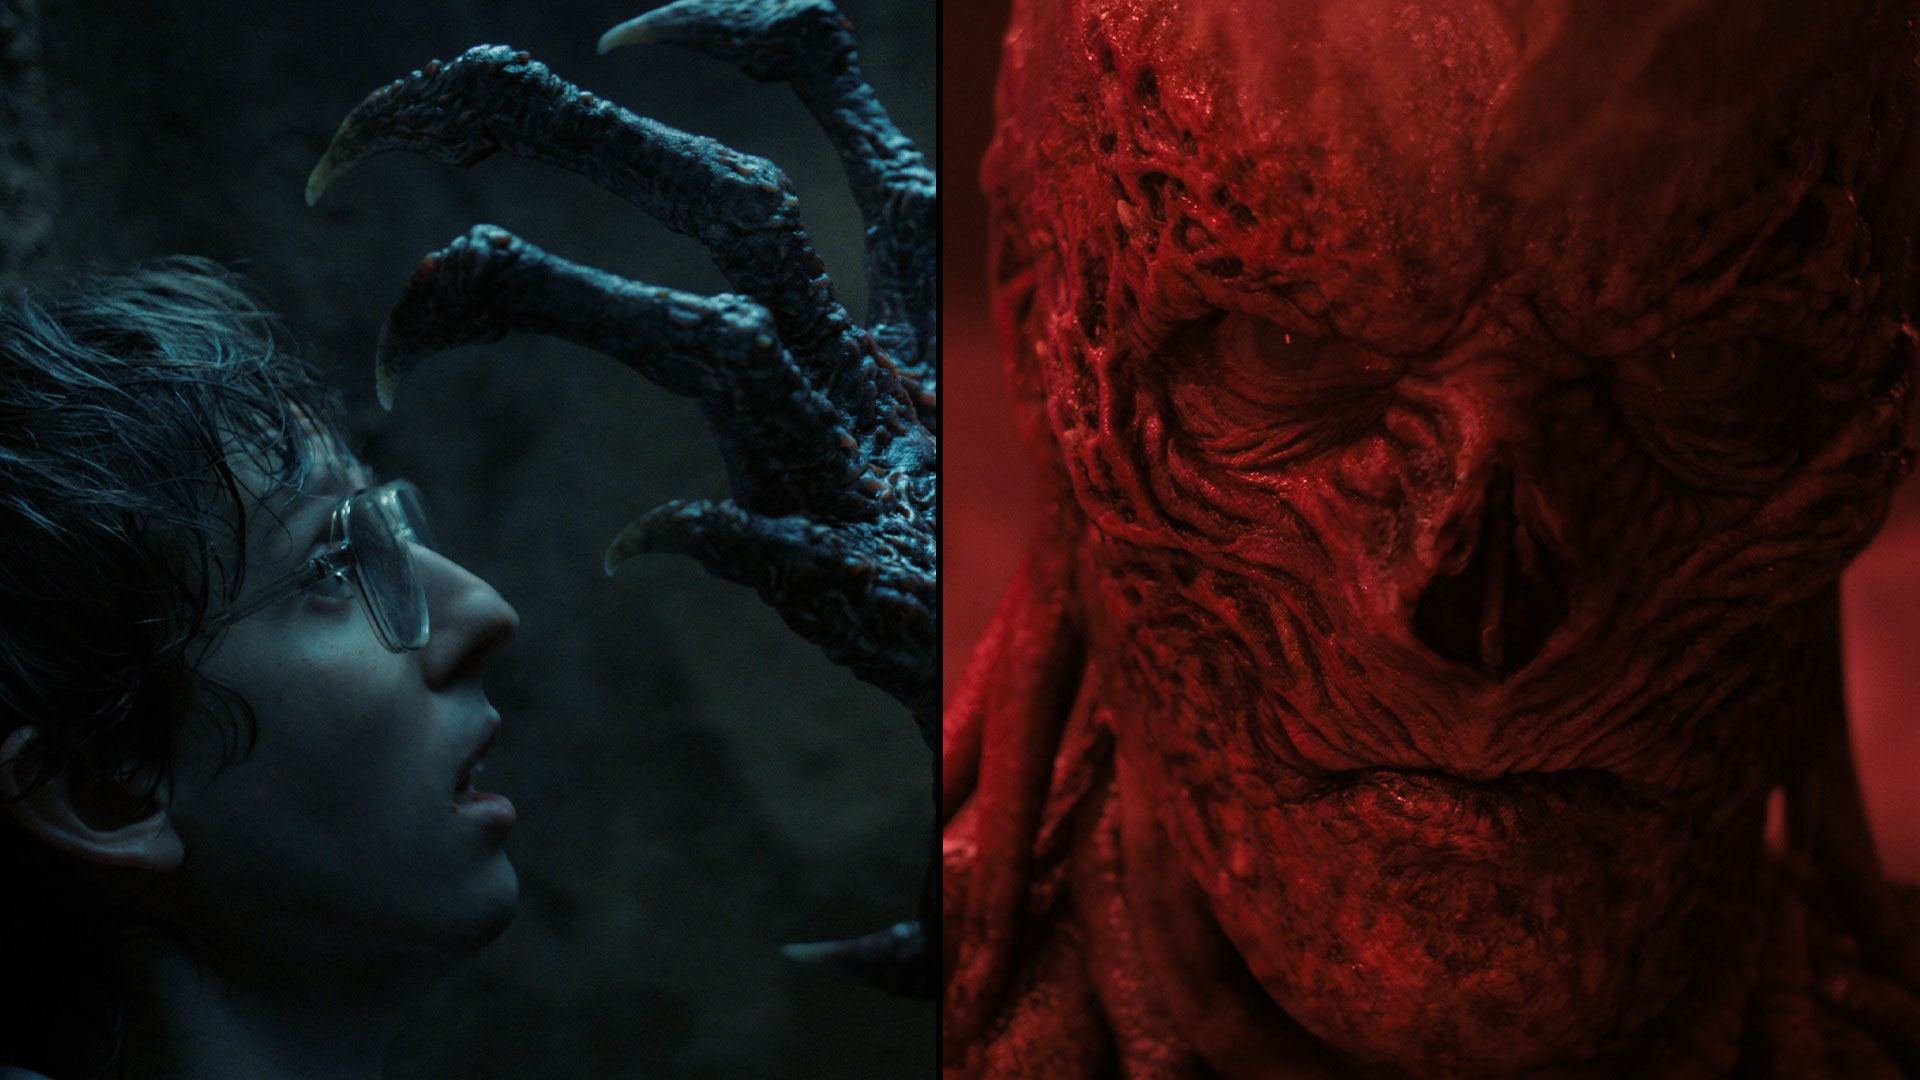 Vecna in Stranger Things is a powerful allegory for untreated trauma